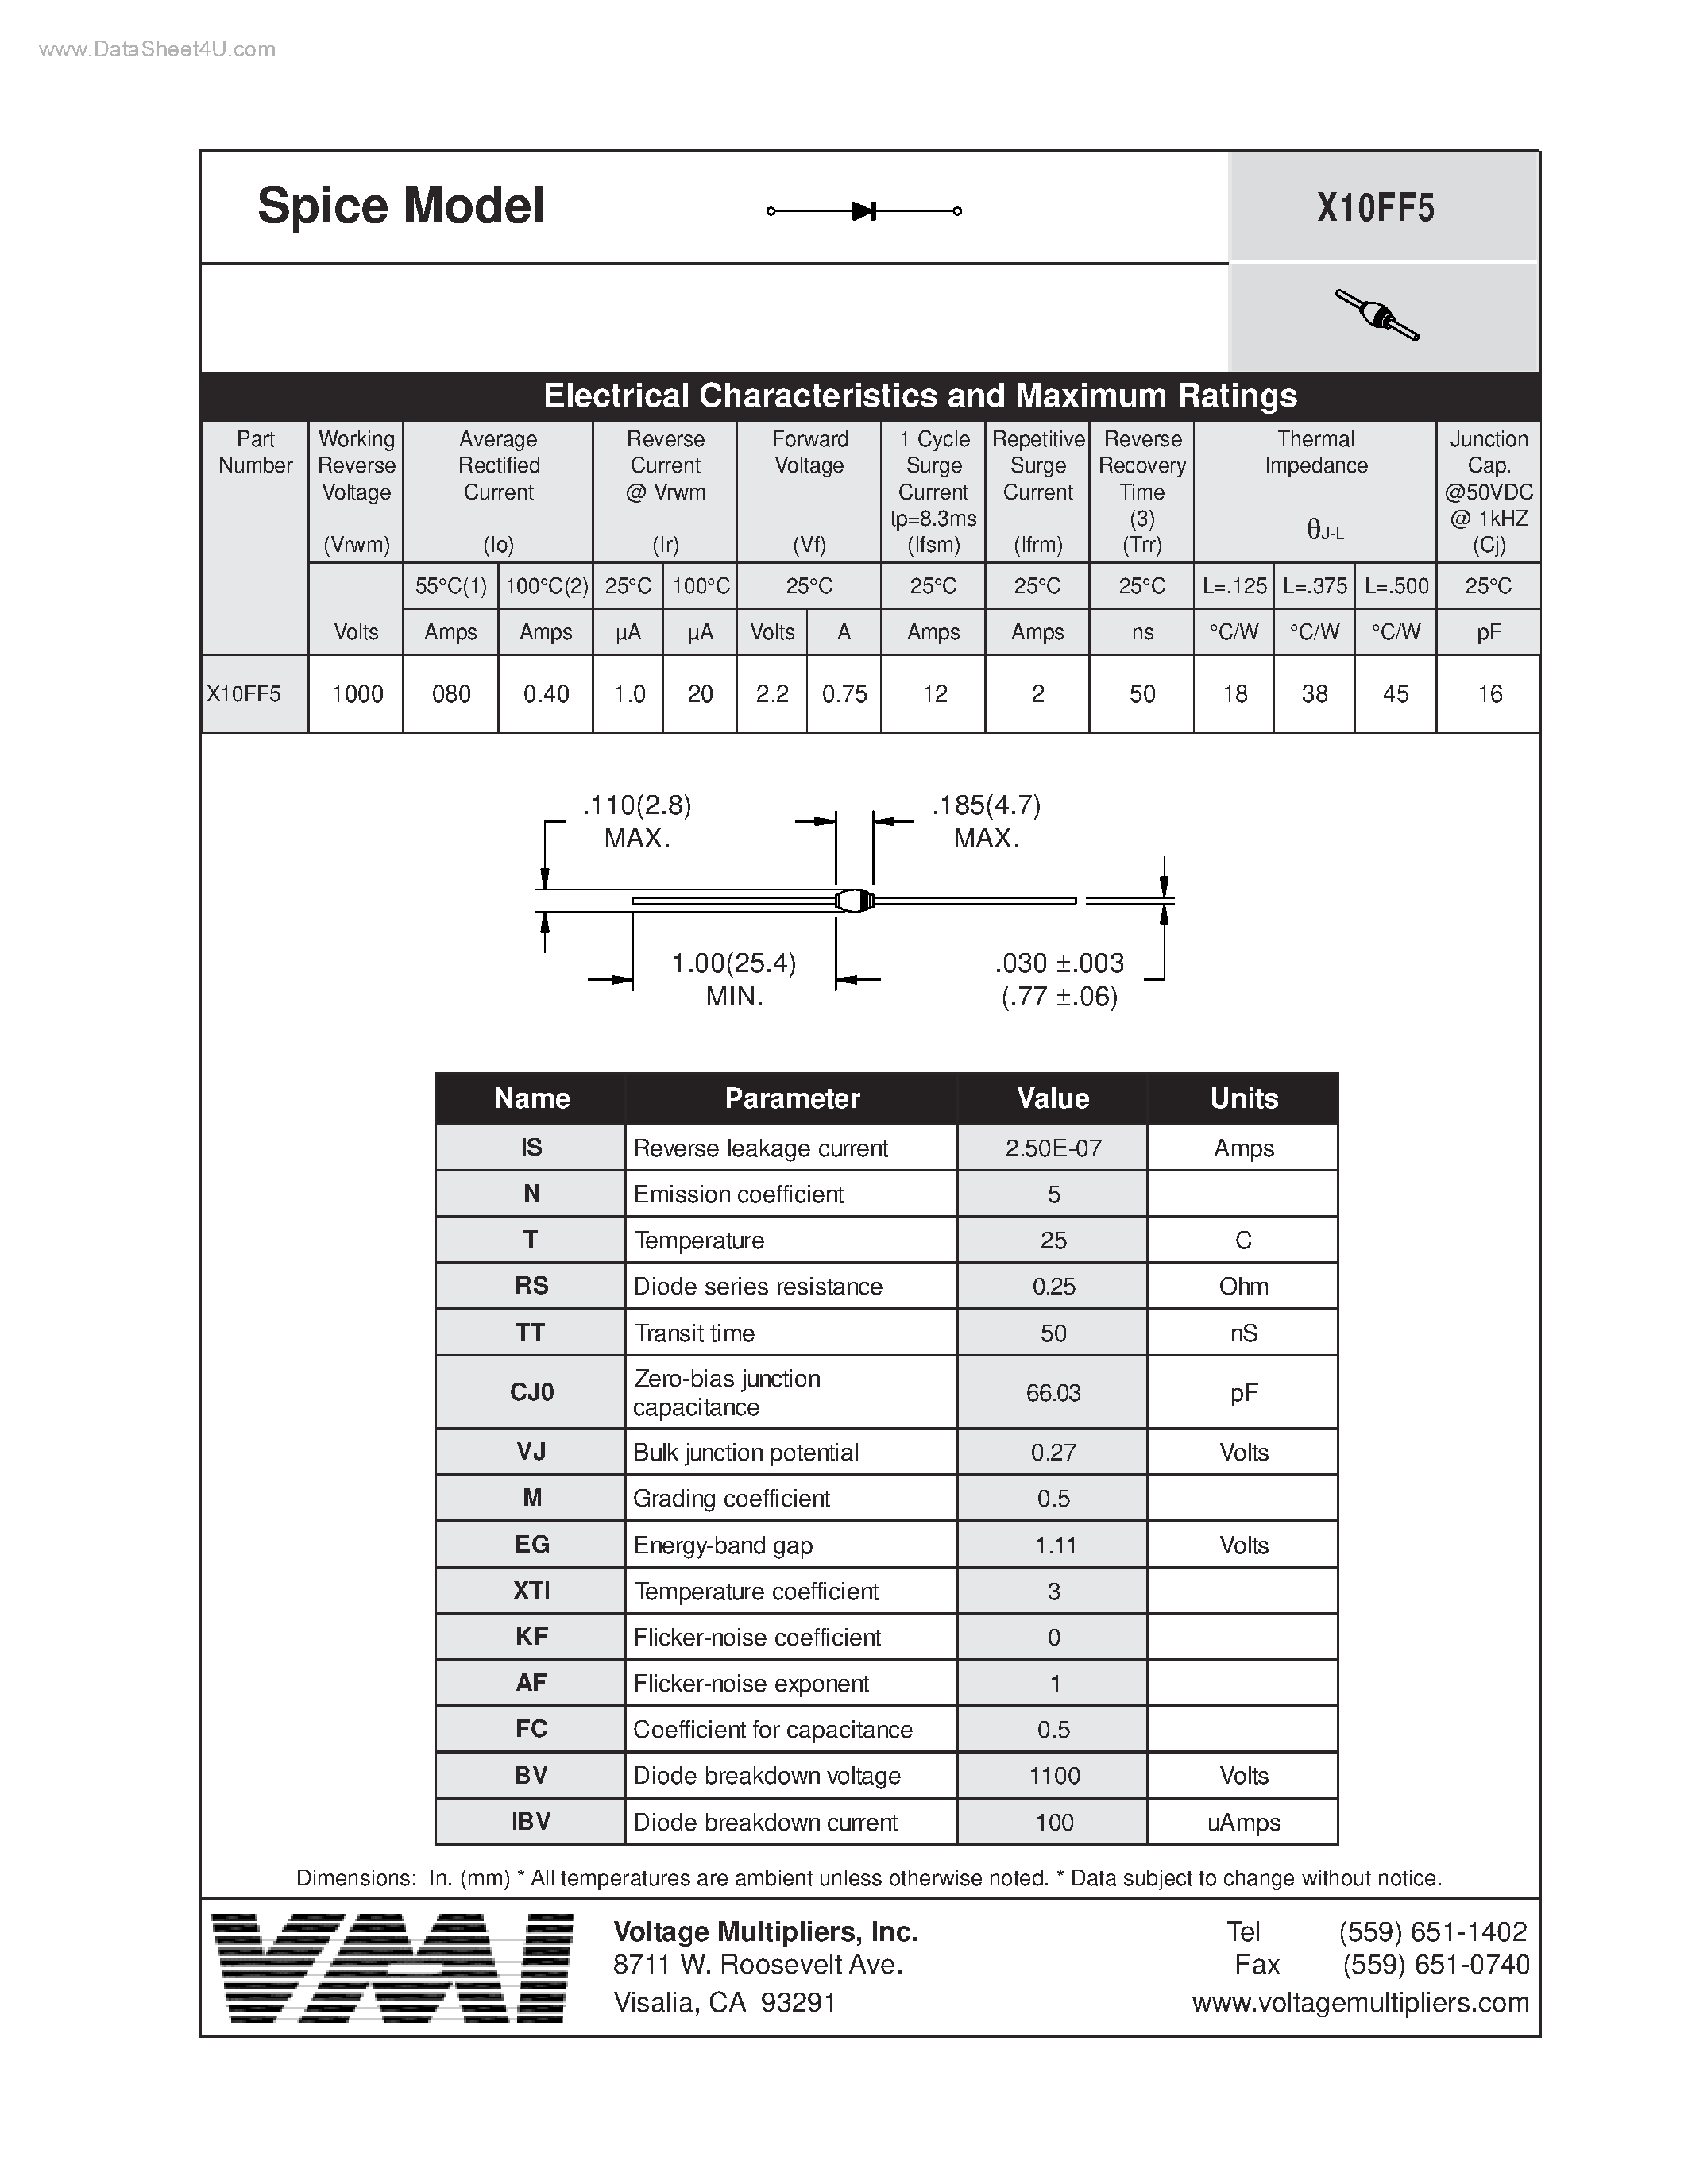 Datasheet X10FF5 - Spice Model page 1